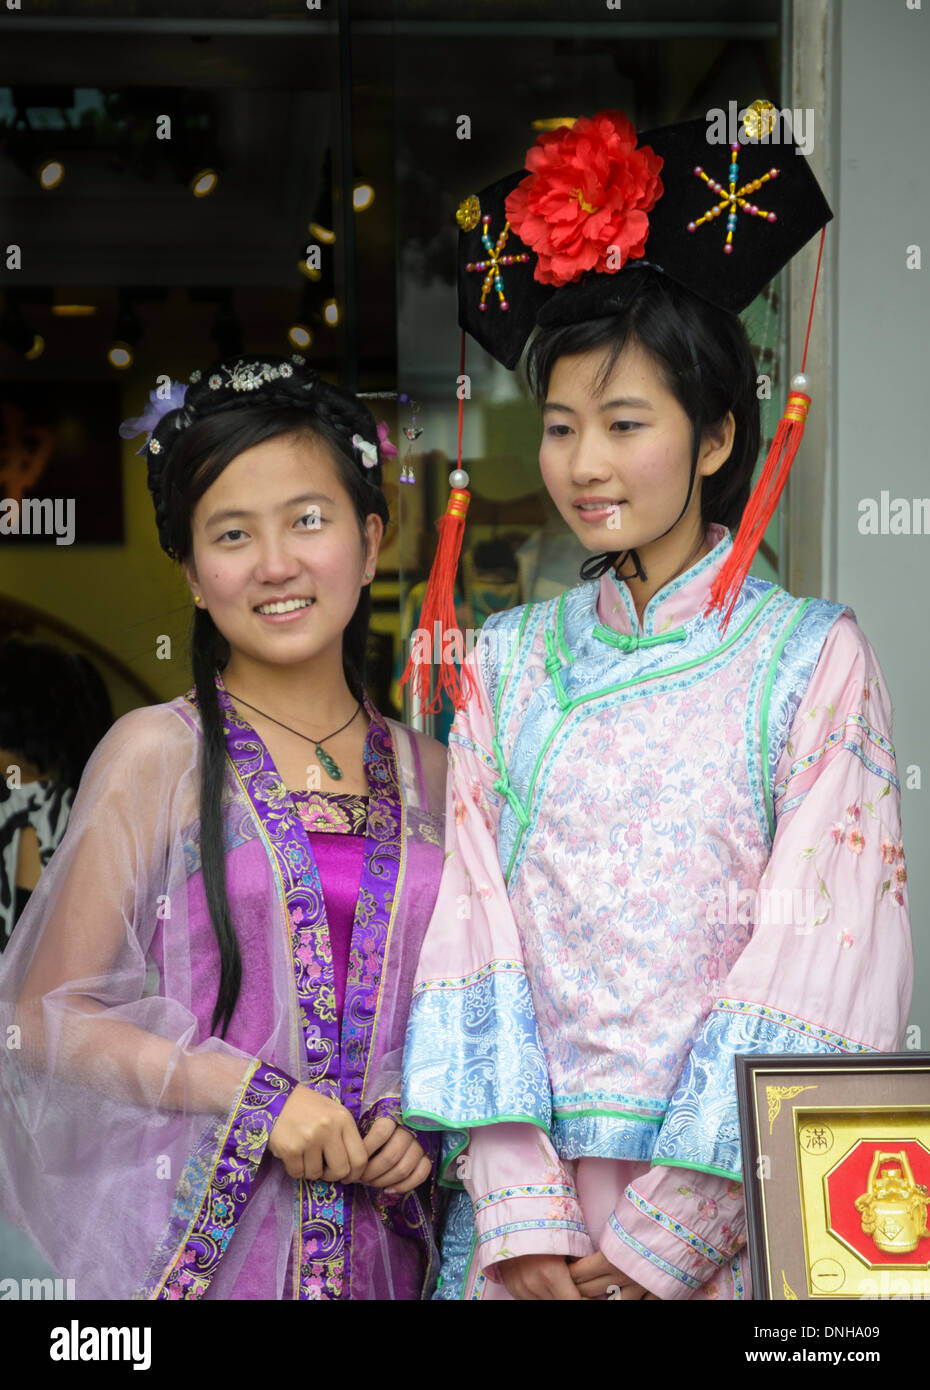 Women in Traditional China